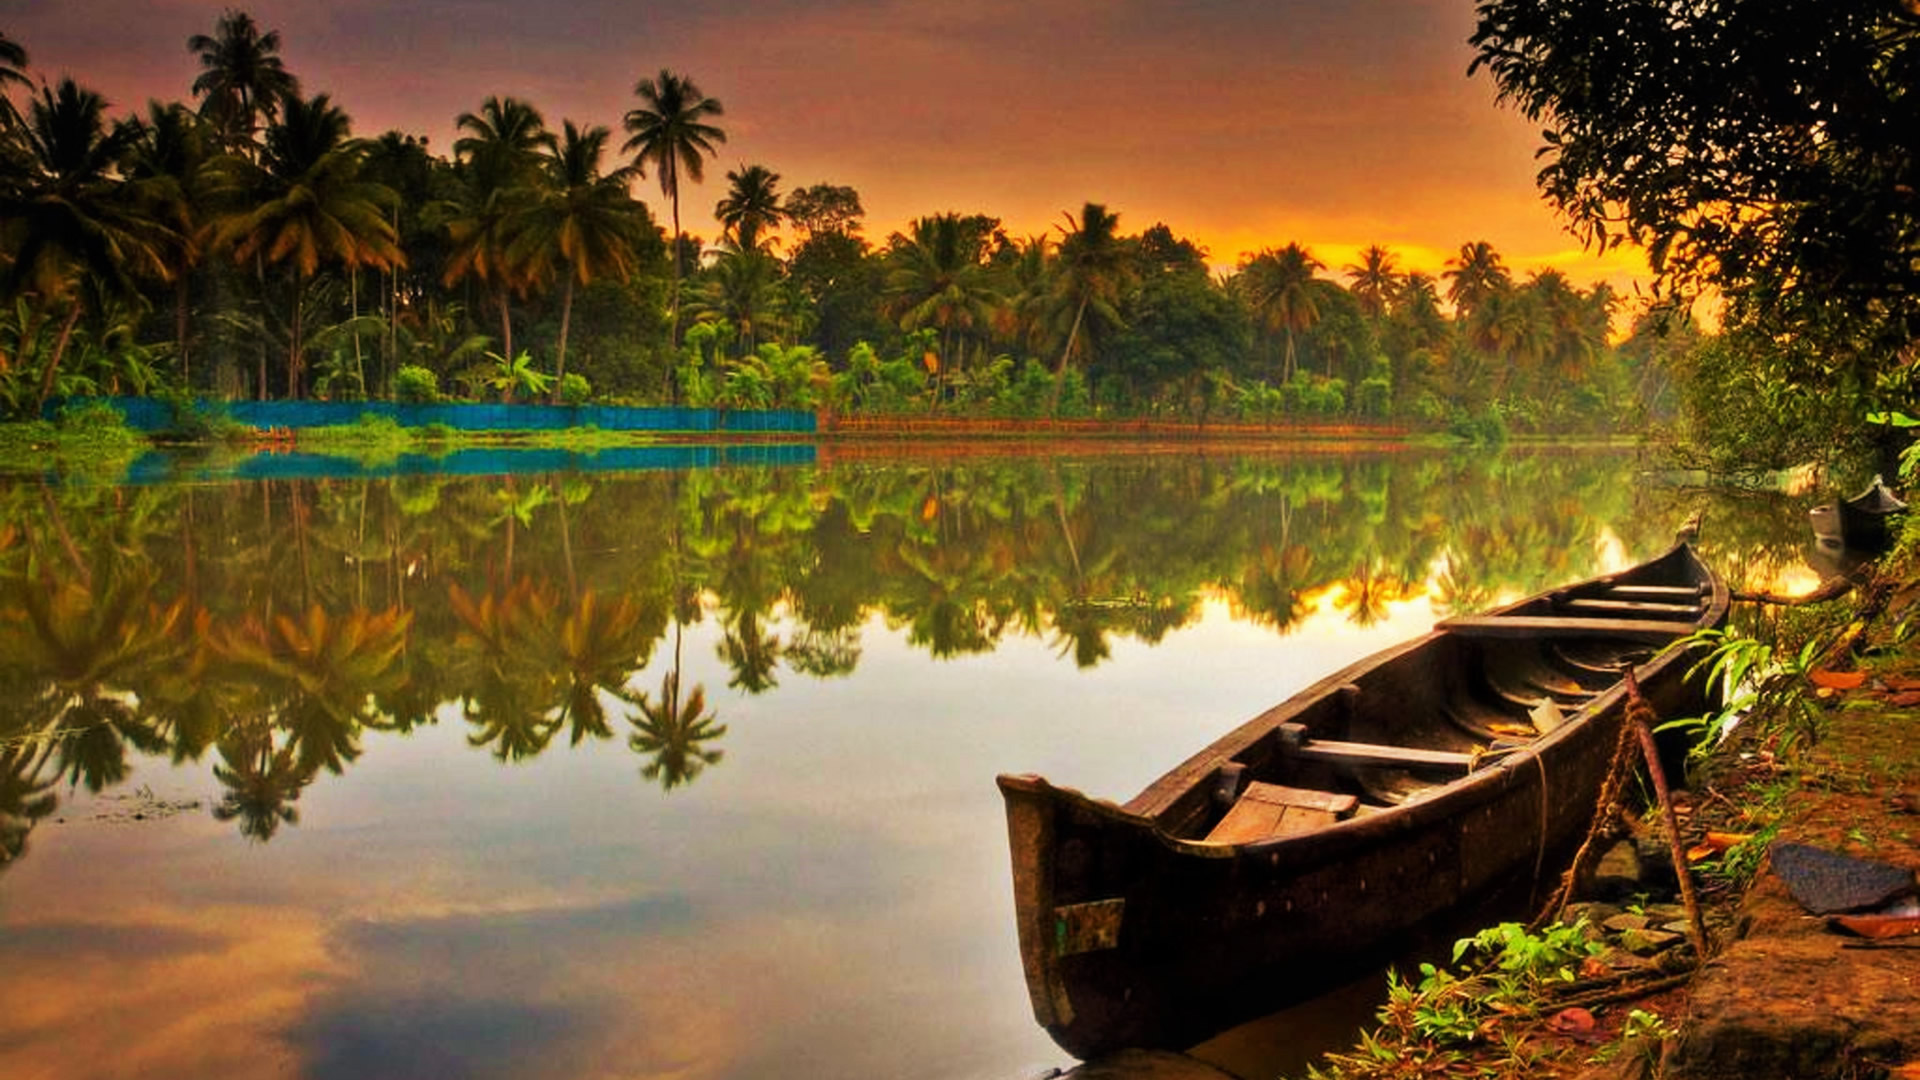 Globetrotter Agency Limited - Kerala Gods Own Country Hd , HD Wallpaper & Backgrounds